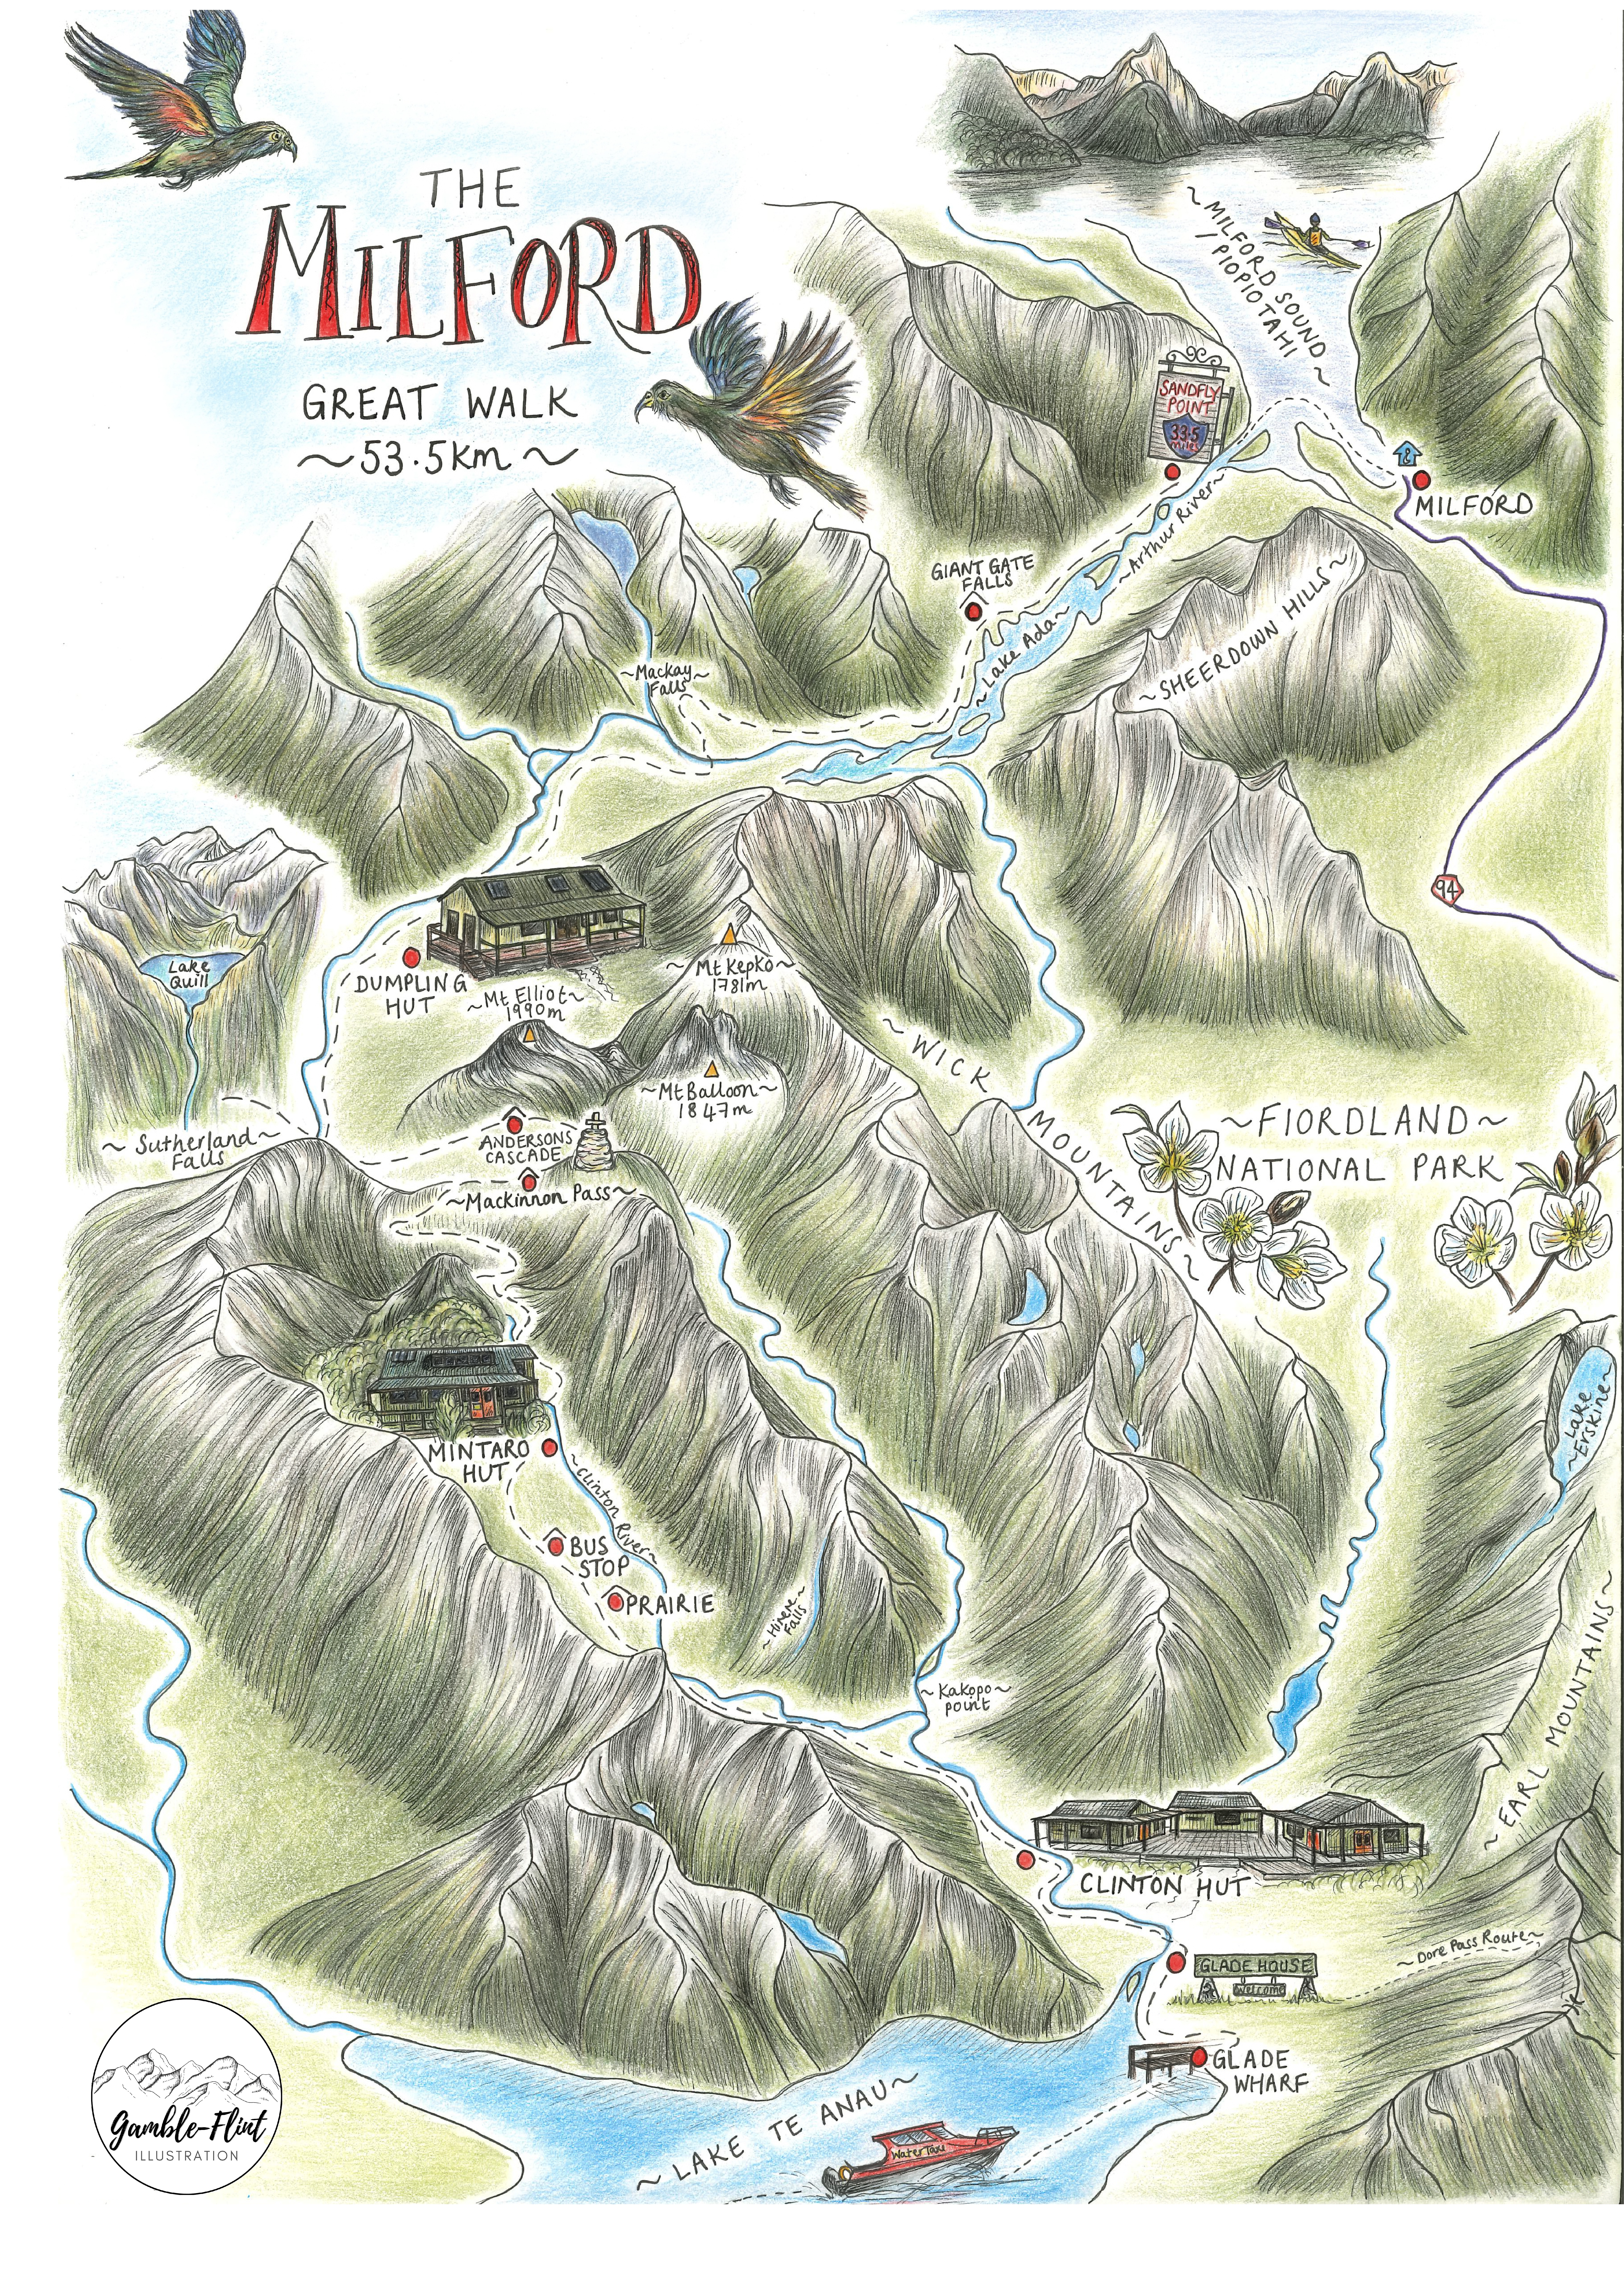 Illustrated map of the Milford Track by Rachel Gamble-Flint